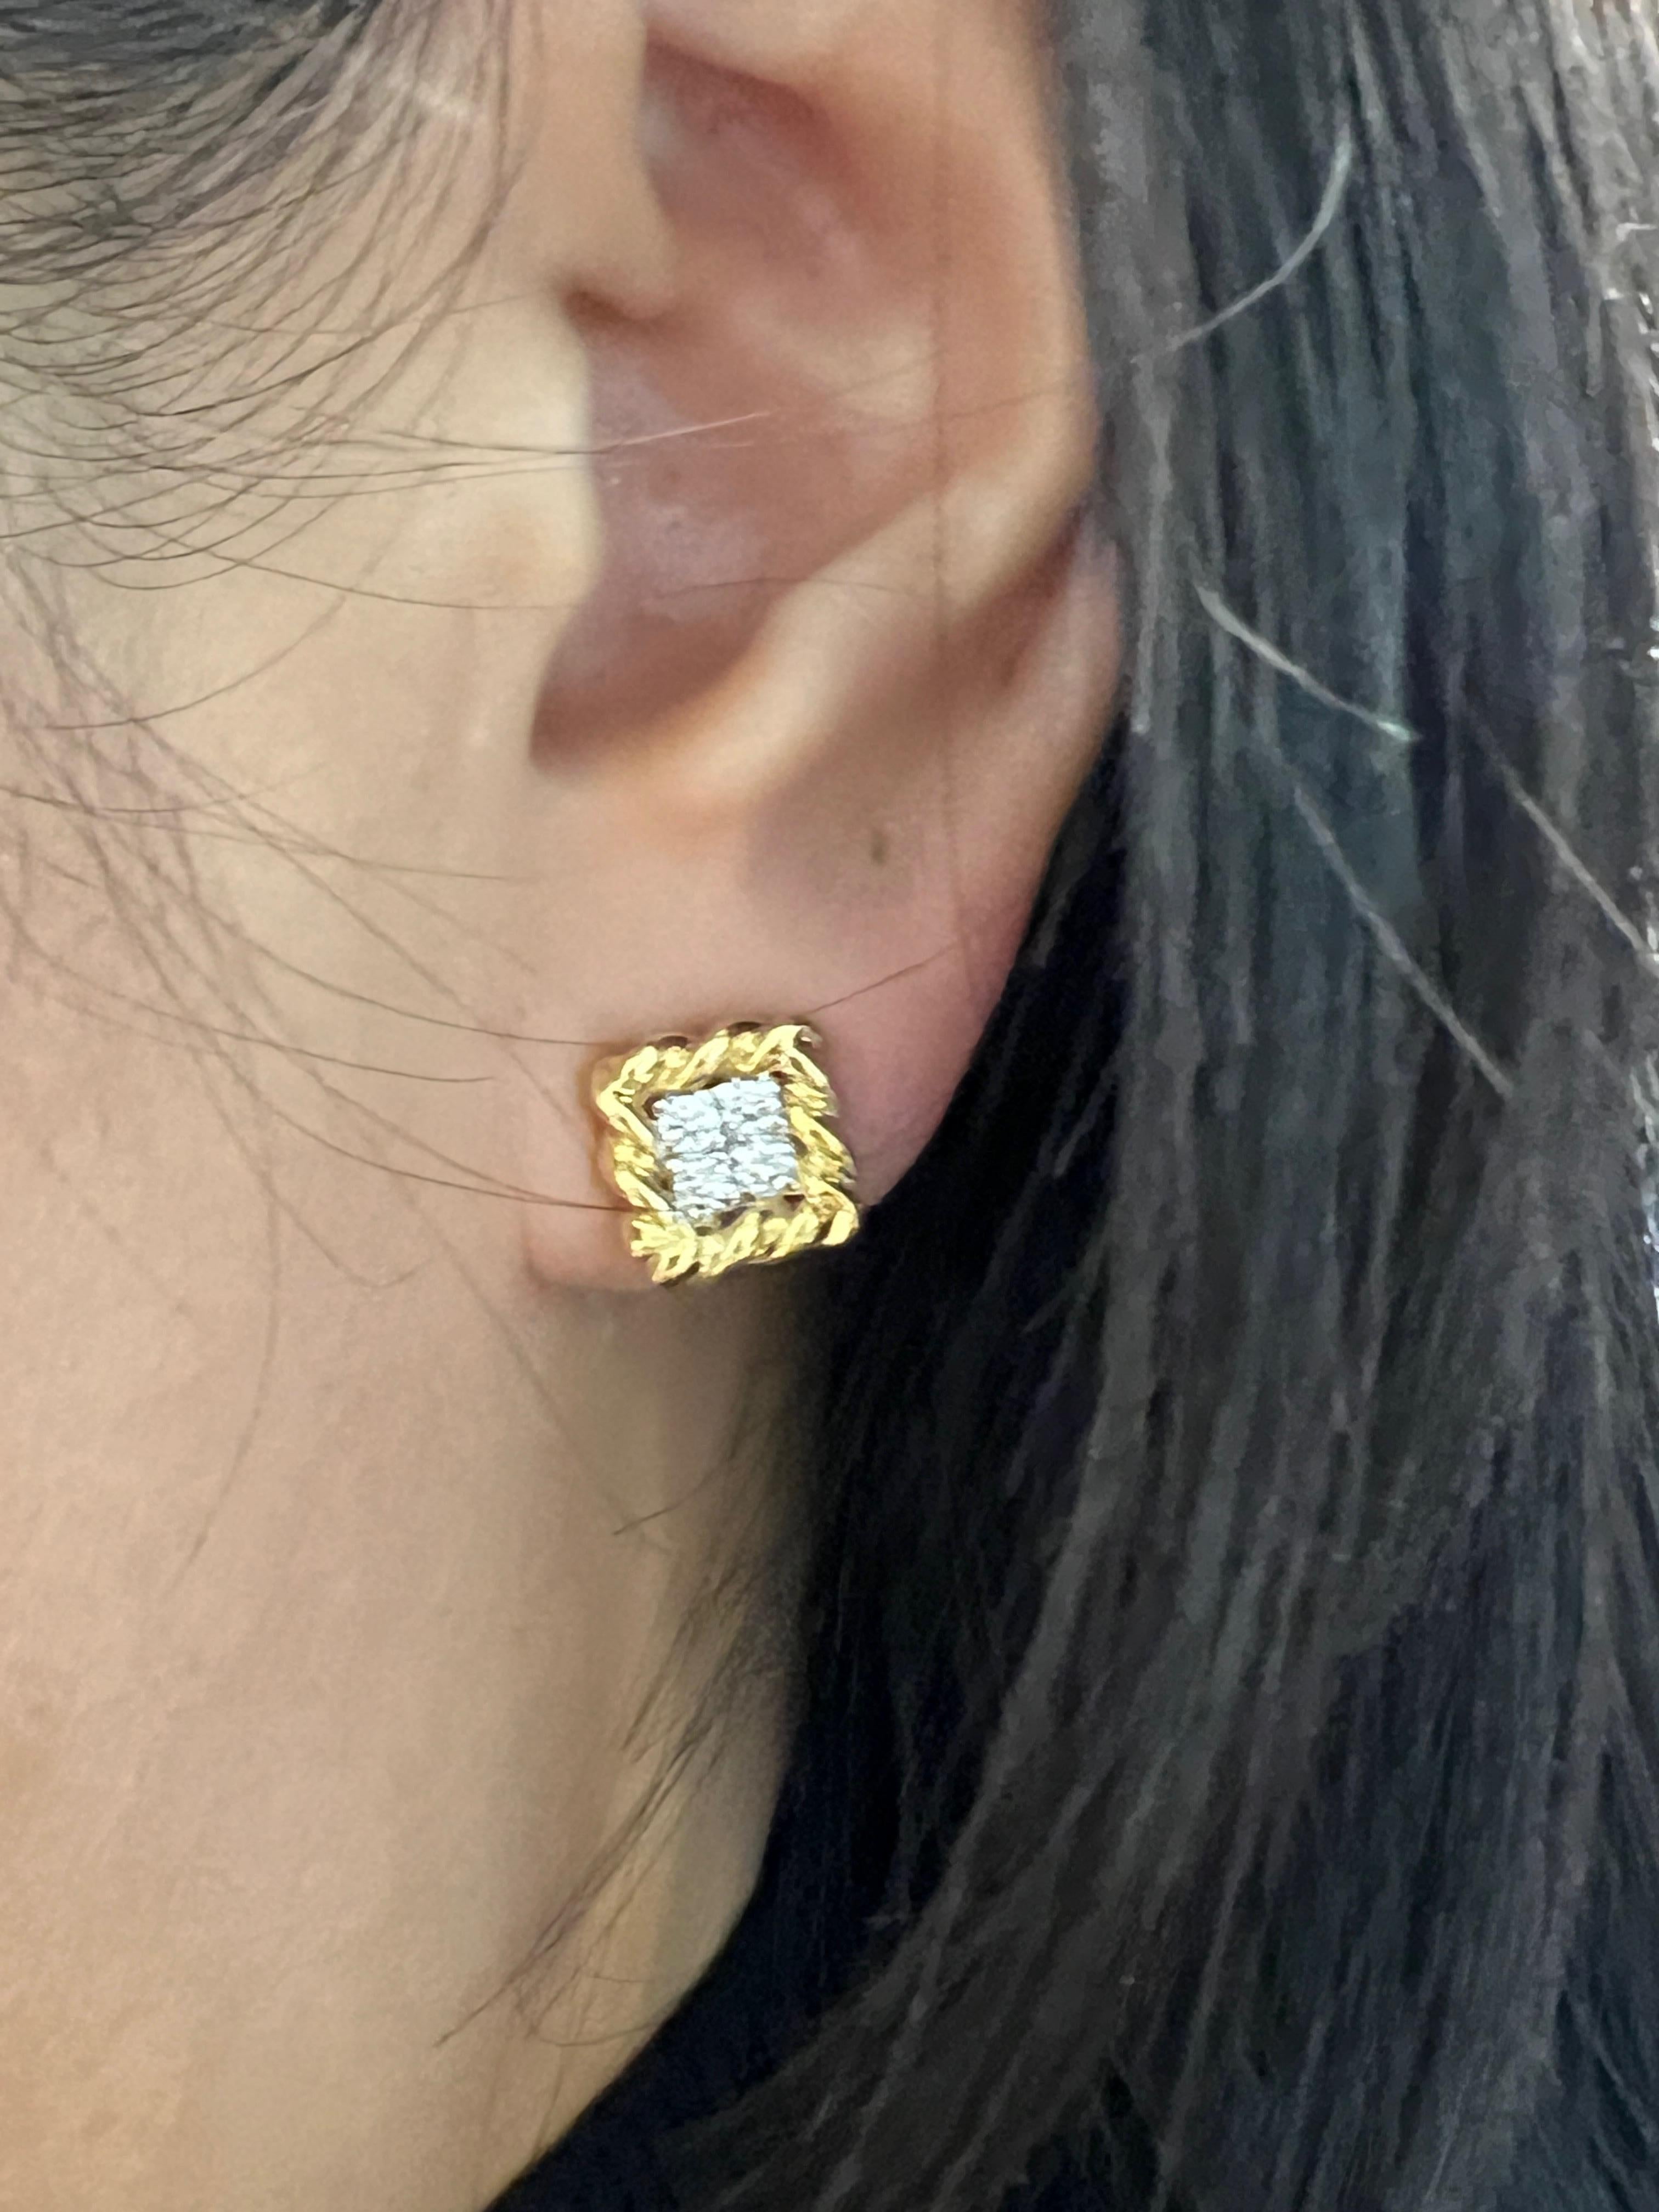 These gorgeous clip-on earrings will make any wardrobe. 0.40 ct diamonds are E/F in color and VS1/VS2 in clarity. They are encased in 18k yellow gold. A great addition for any fashionista. 